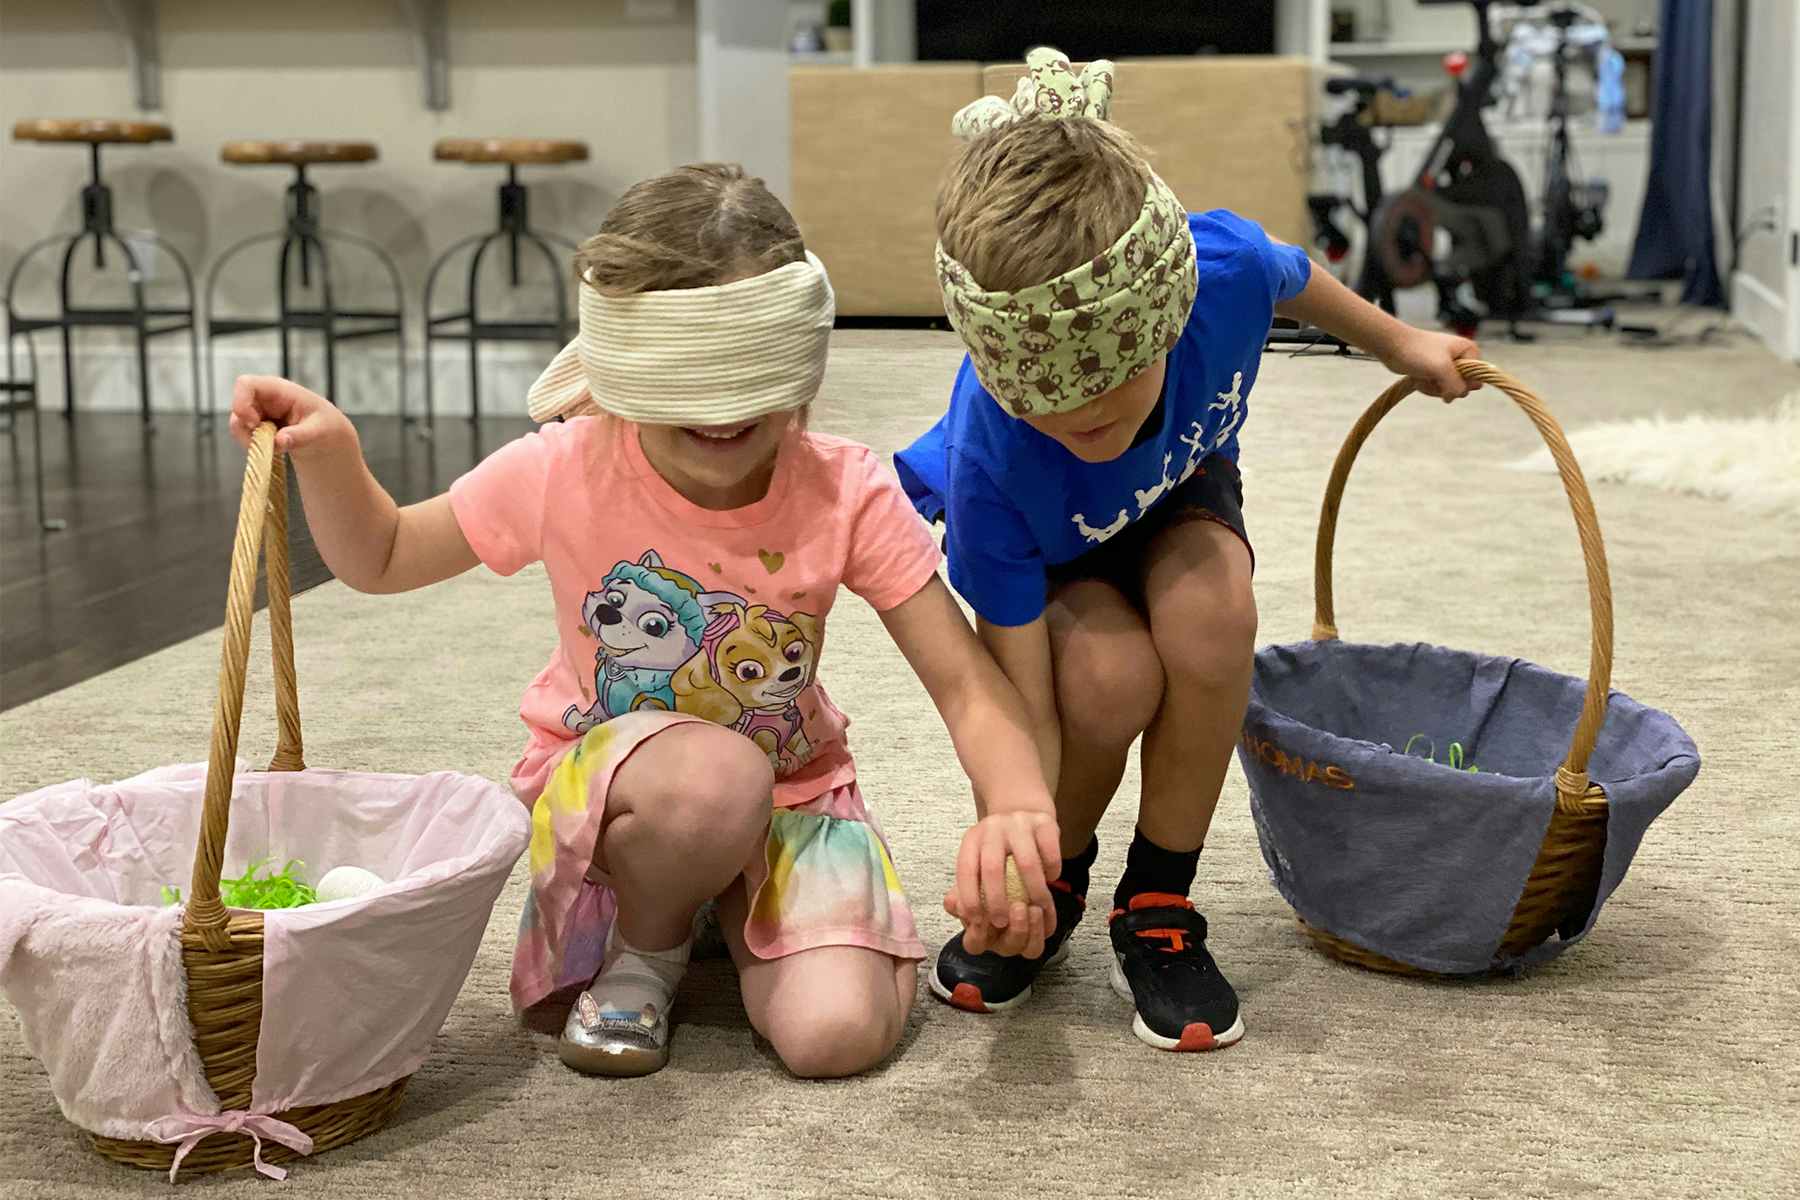 Two kids holding wearing blindfolds, holding Easter baskets, collecting Easter eggs inside a house.